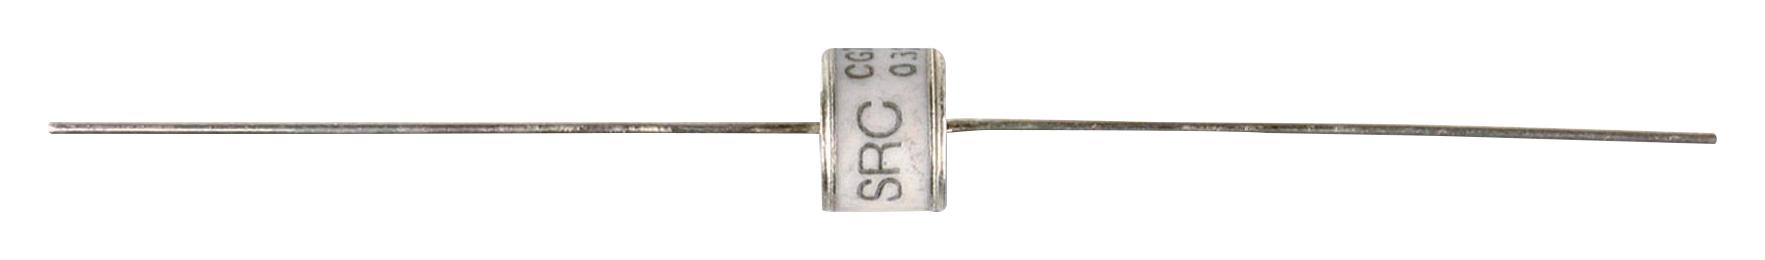 CG33.0L GAS DISCHARGE TUBE, 3KV, AXIAL LITTELFUSE